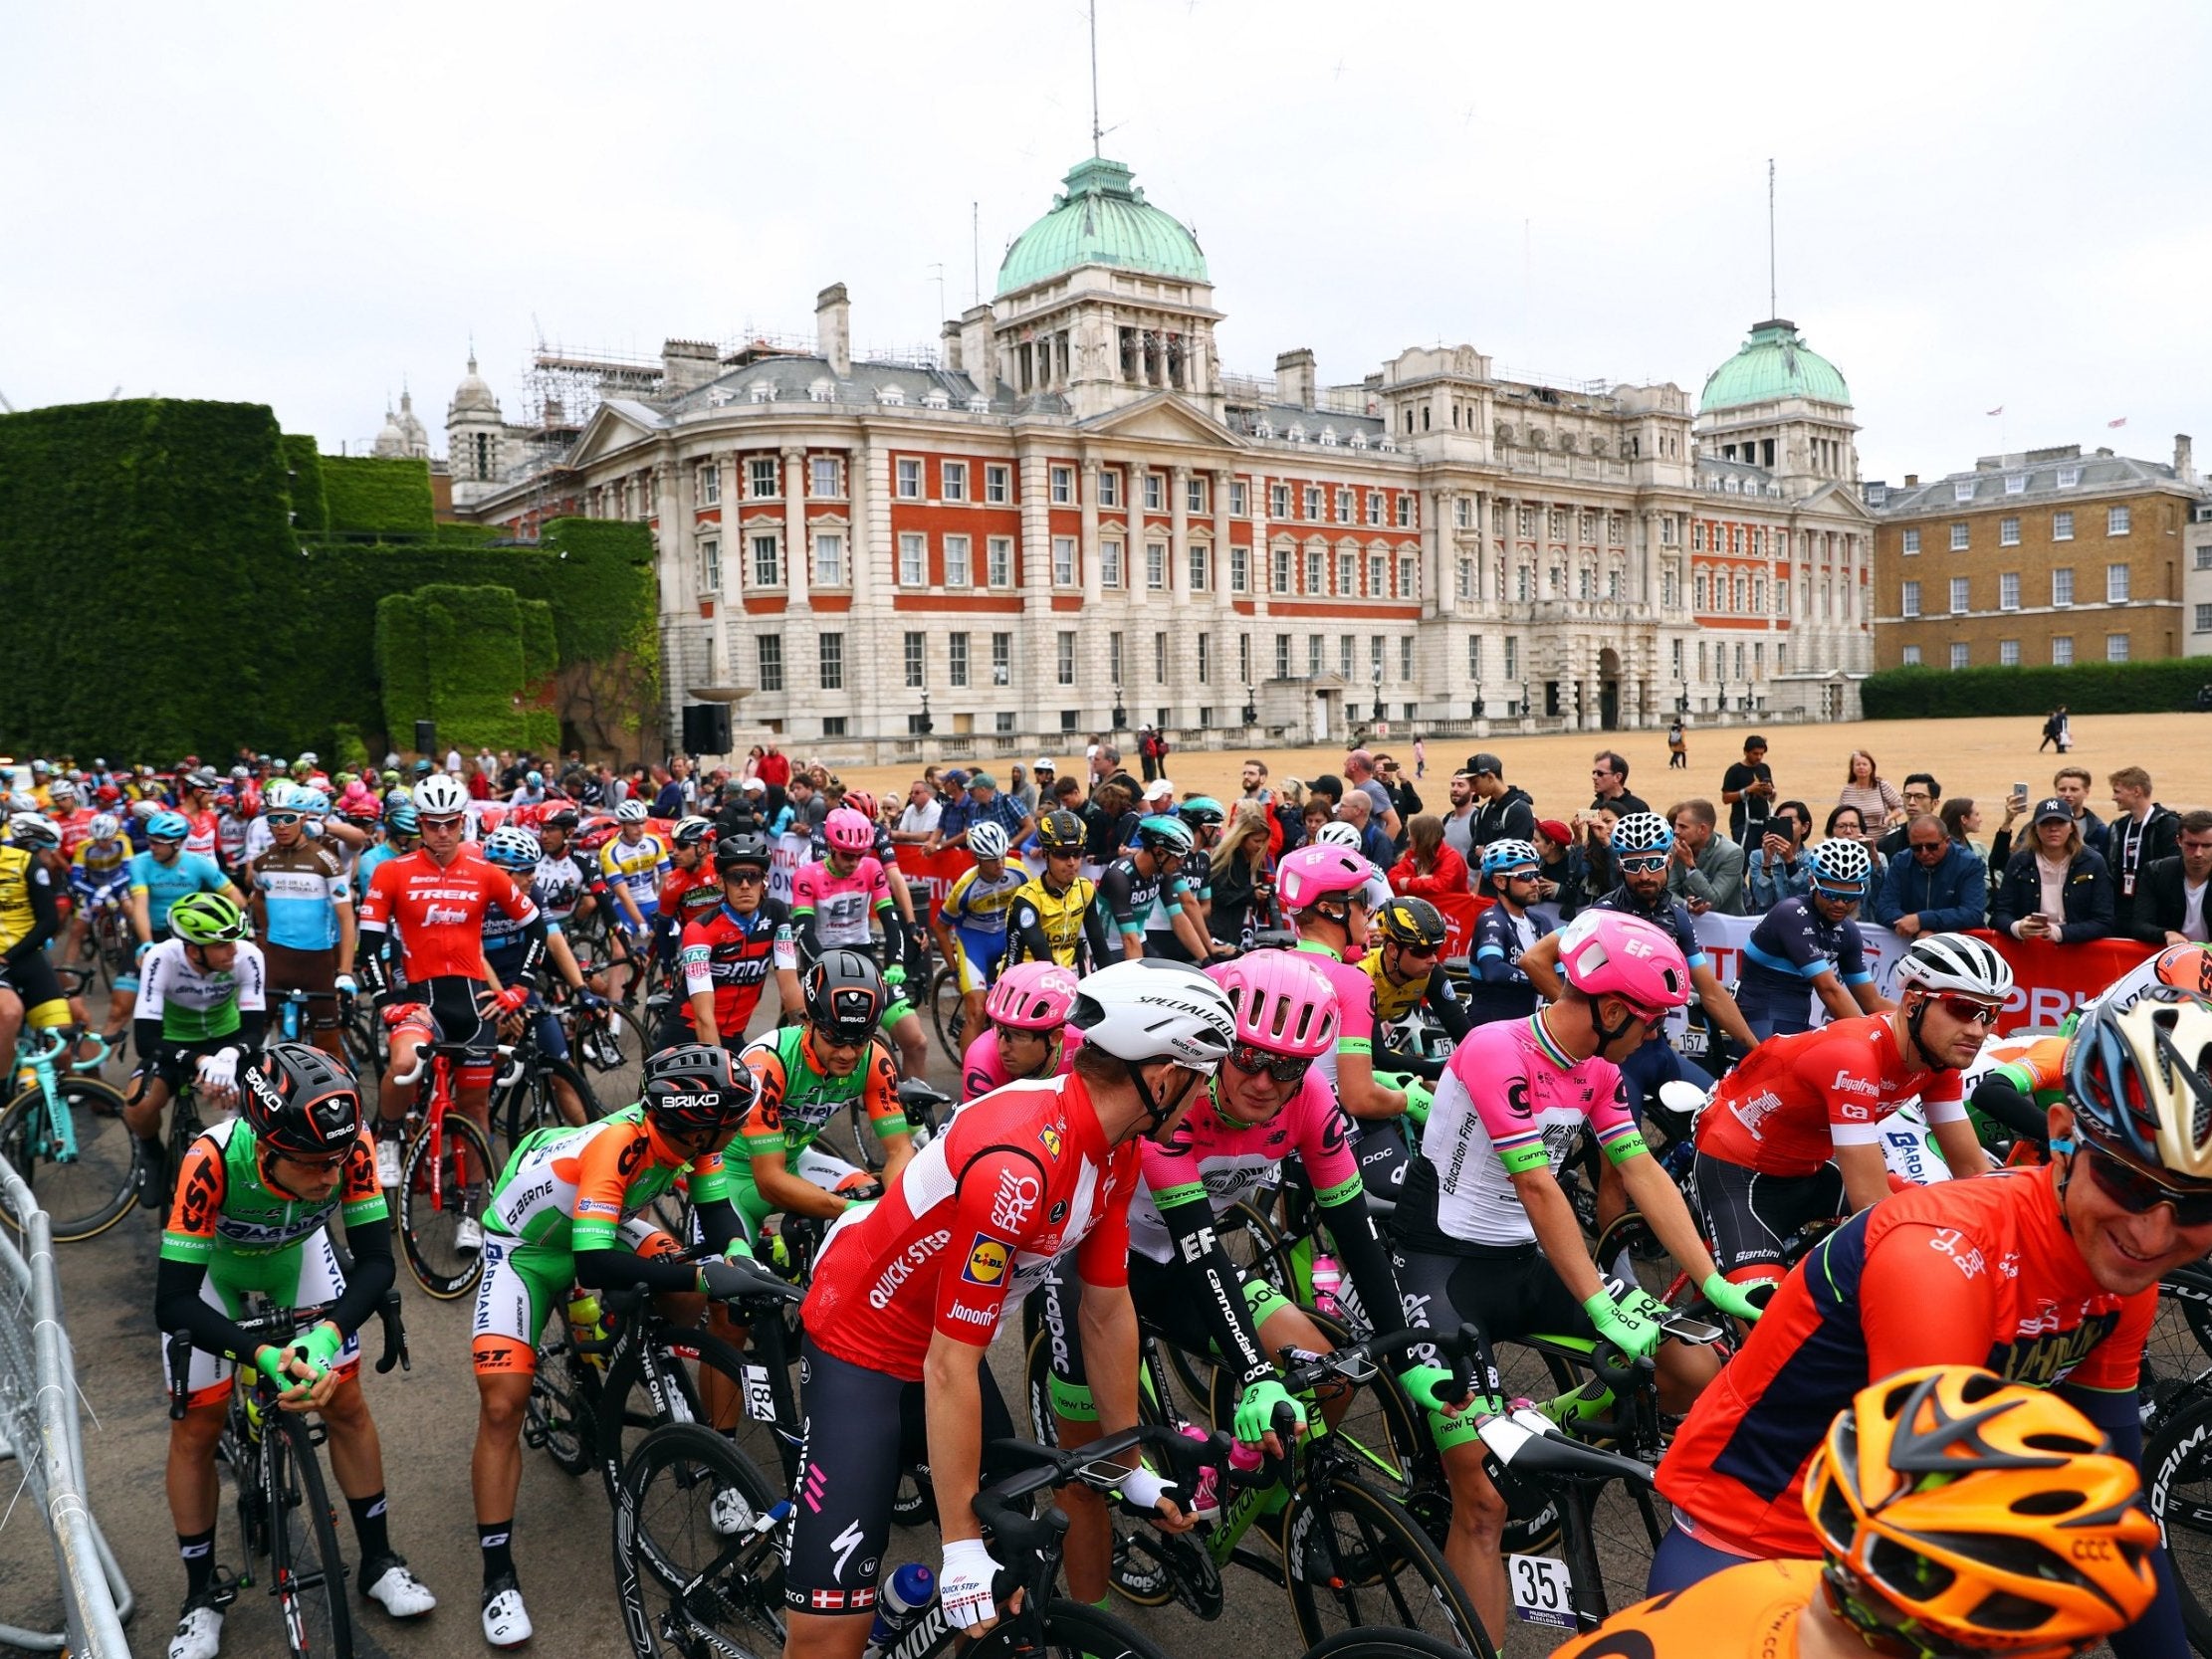 A man died while competing in the RideLondon-Surrey 100 on Sunday